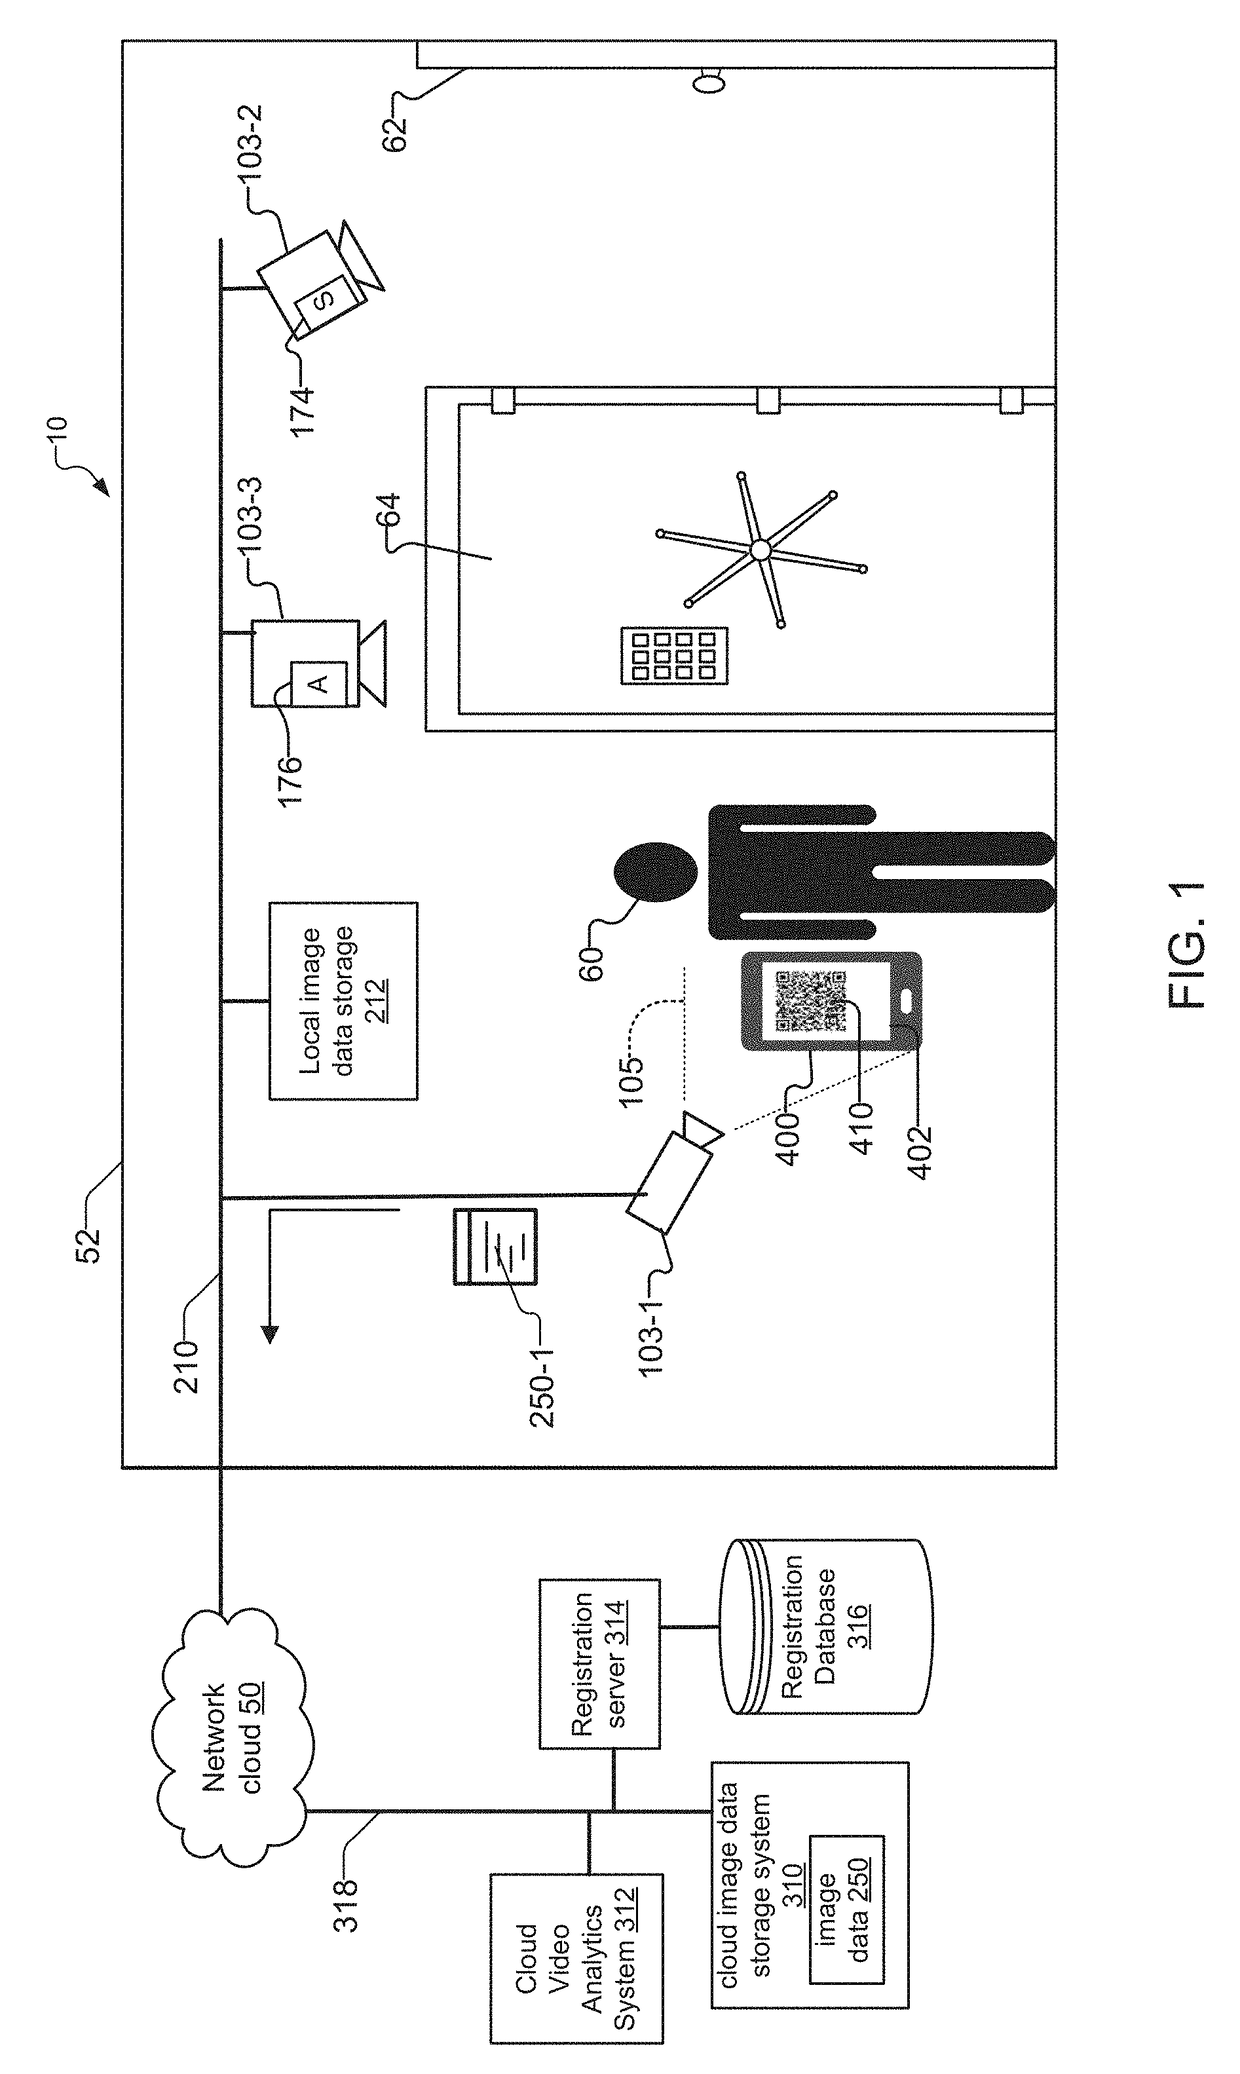 System and method for configuring surveillance cameras using mobile computing devices